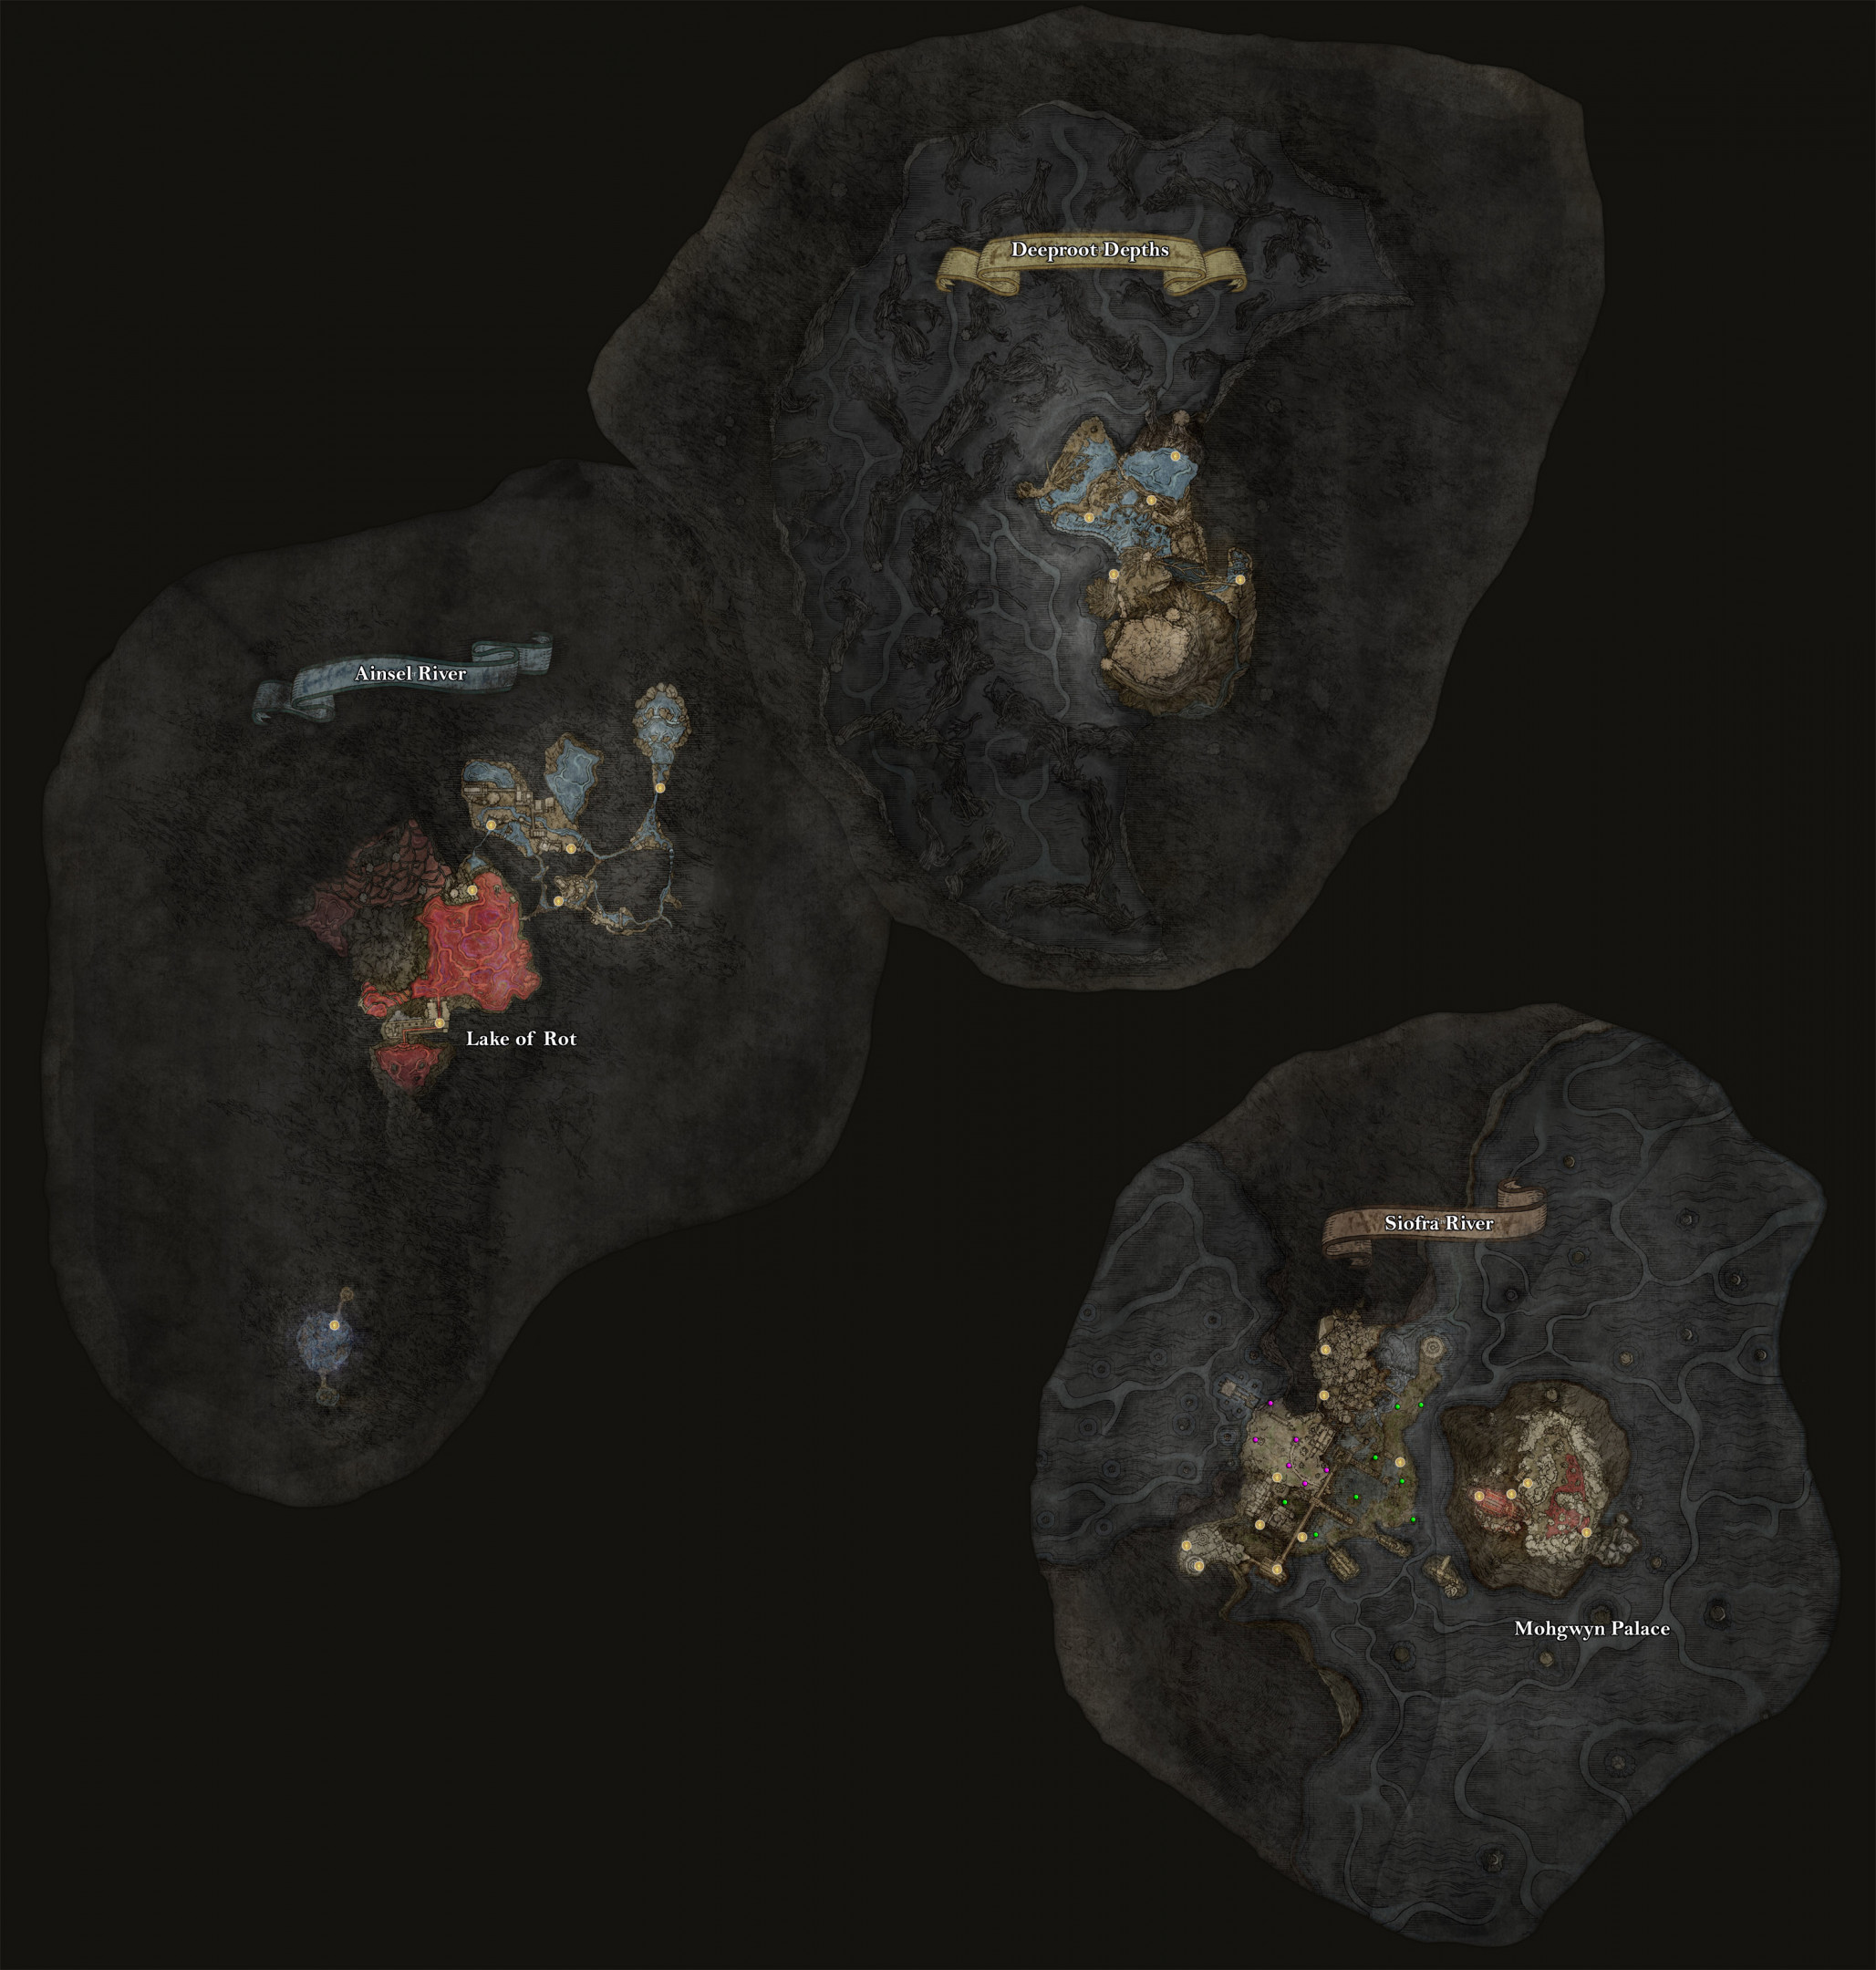 Marika and Radagon's Scarseals represented on the Elden Ring : r